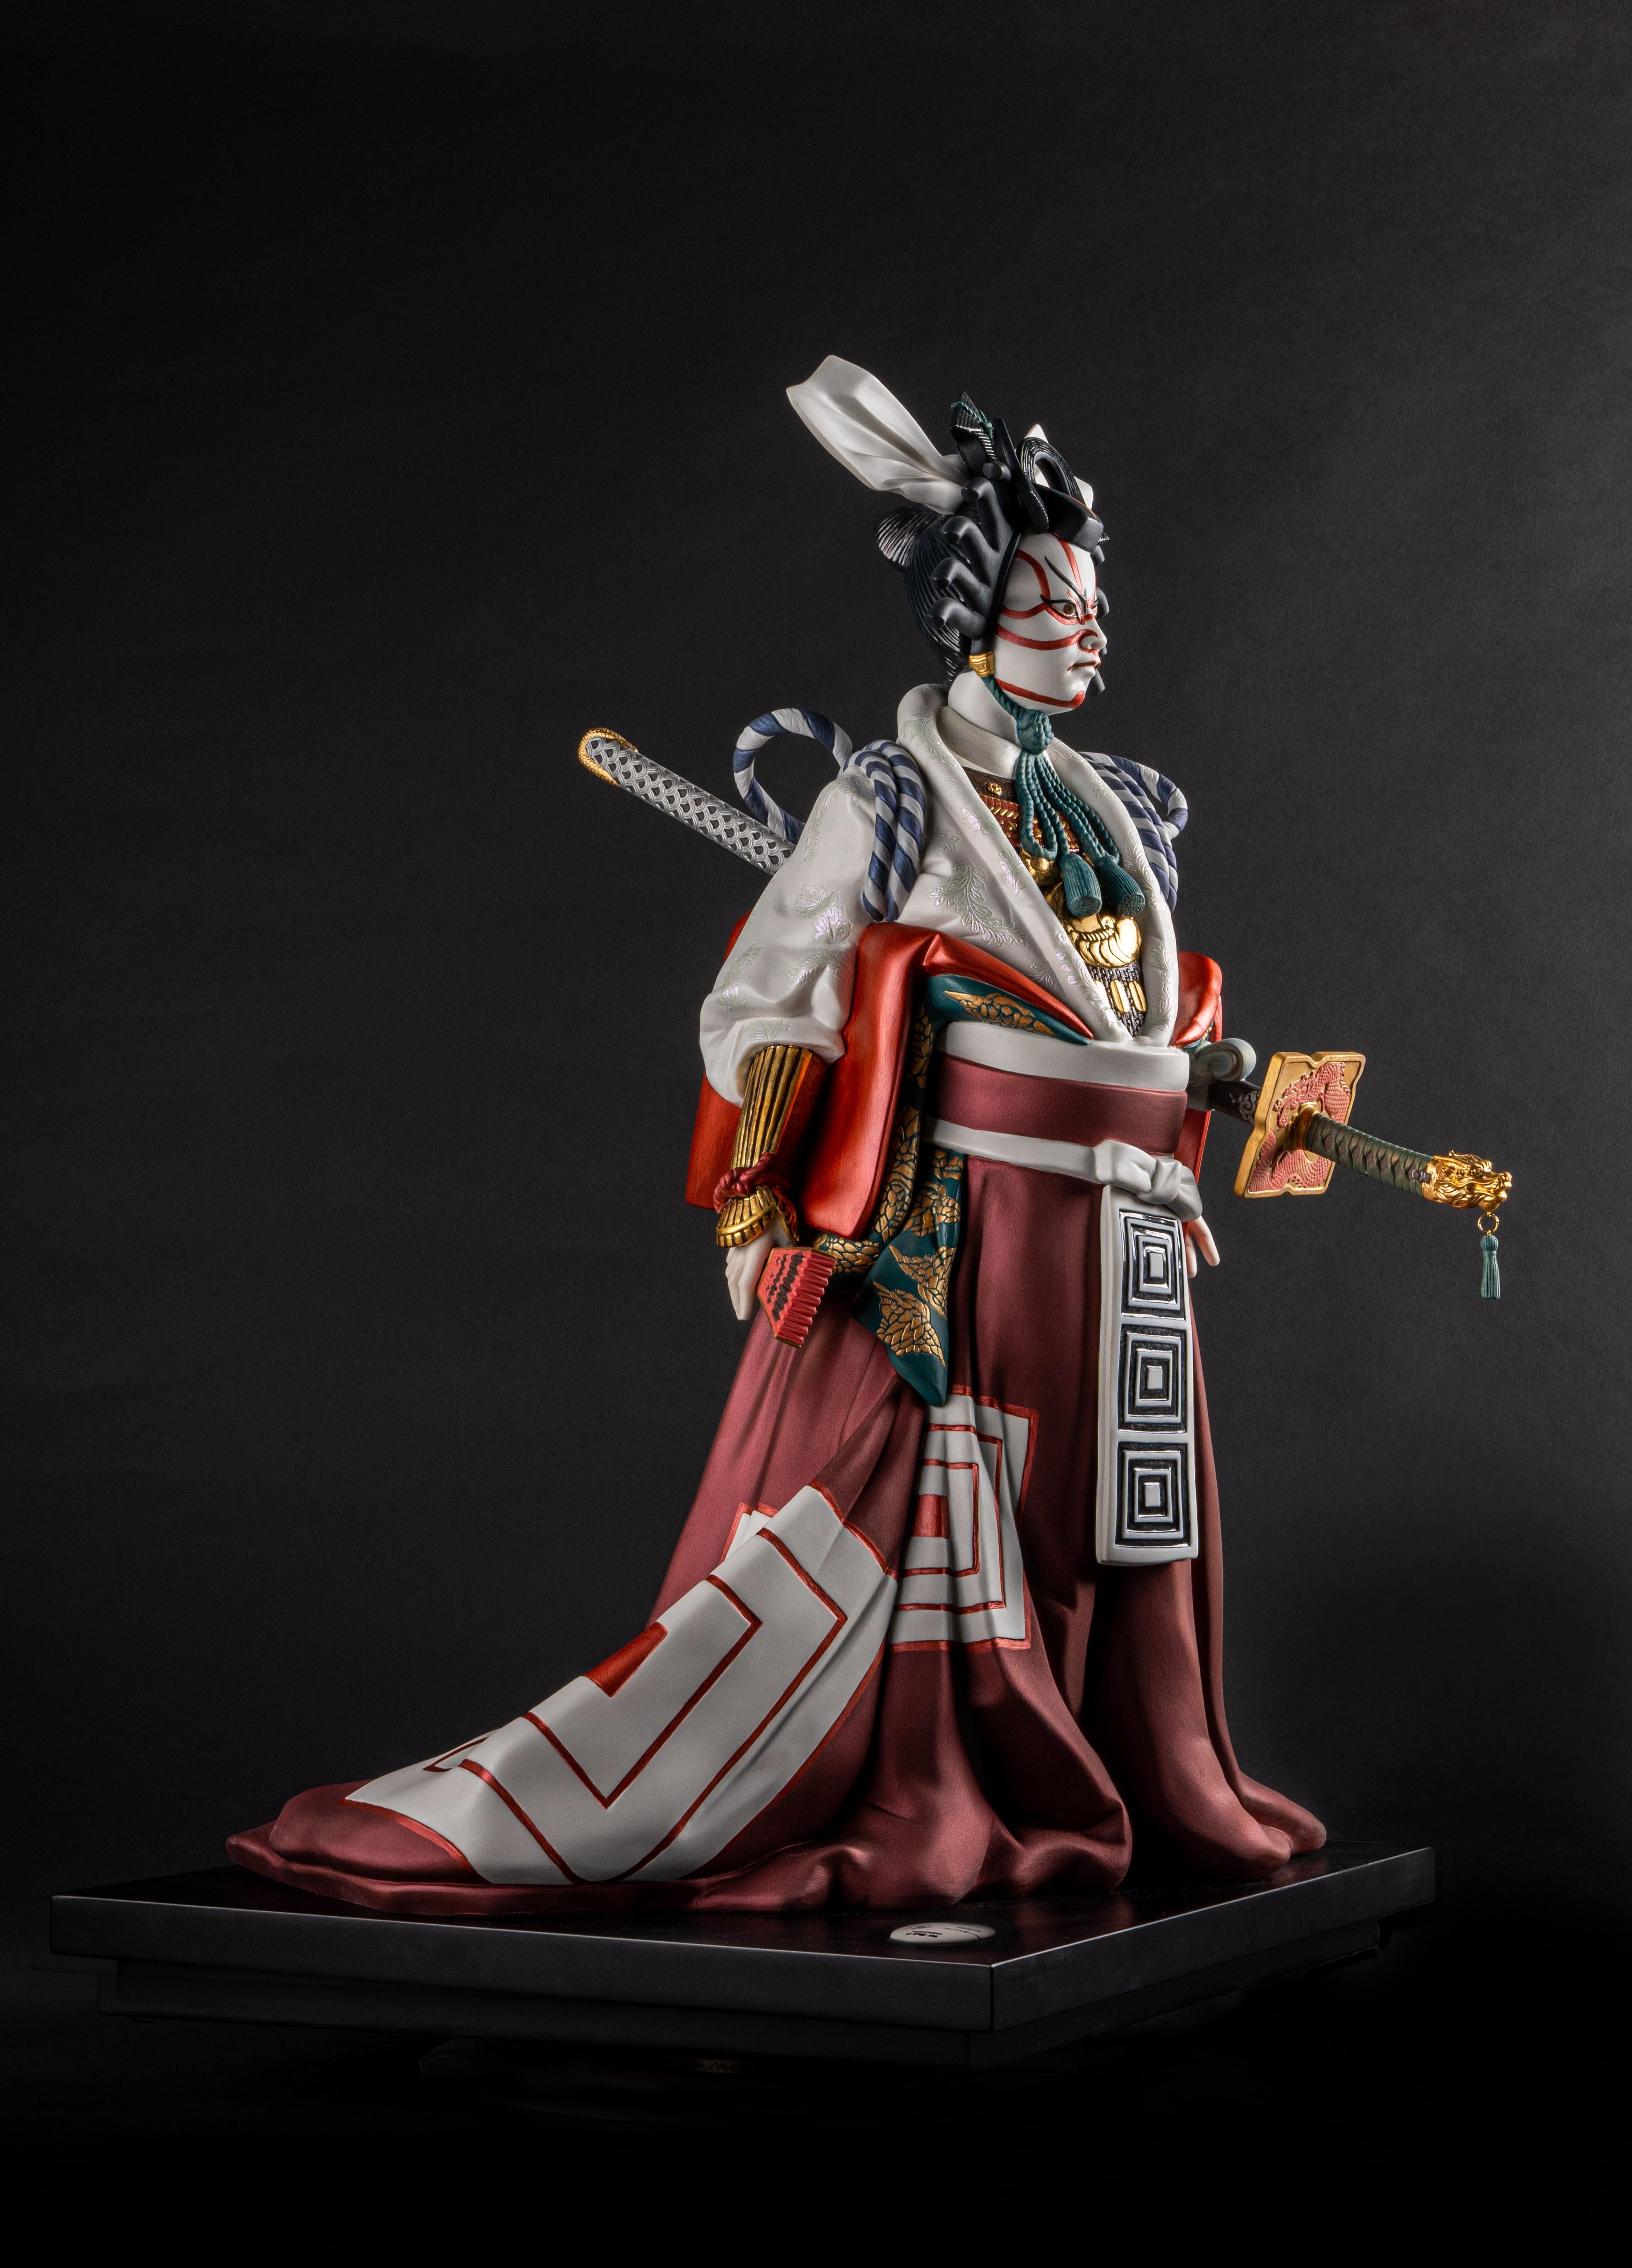 A limited edition High Porcelain sculpture depicts a kabuki actor, one of the most highly appreciated forms of Japanese theater. This powerful character dressed in a spectacular costume is a limited edition of 250 units in High Porcelain, the